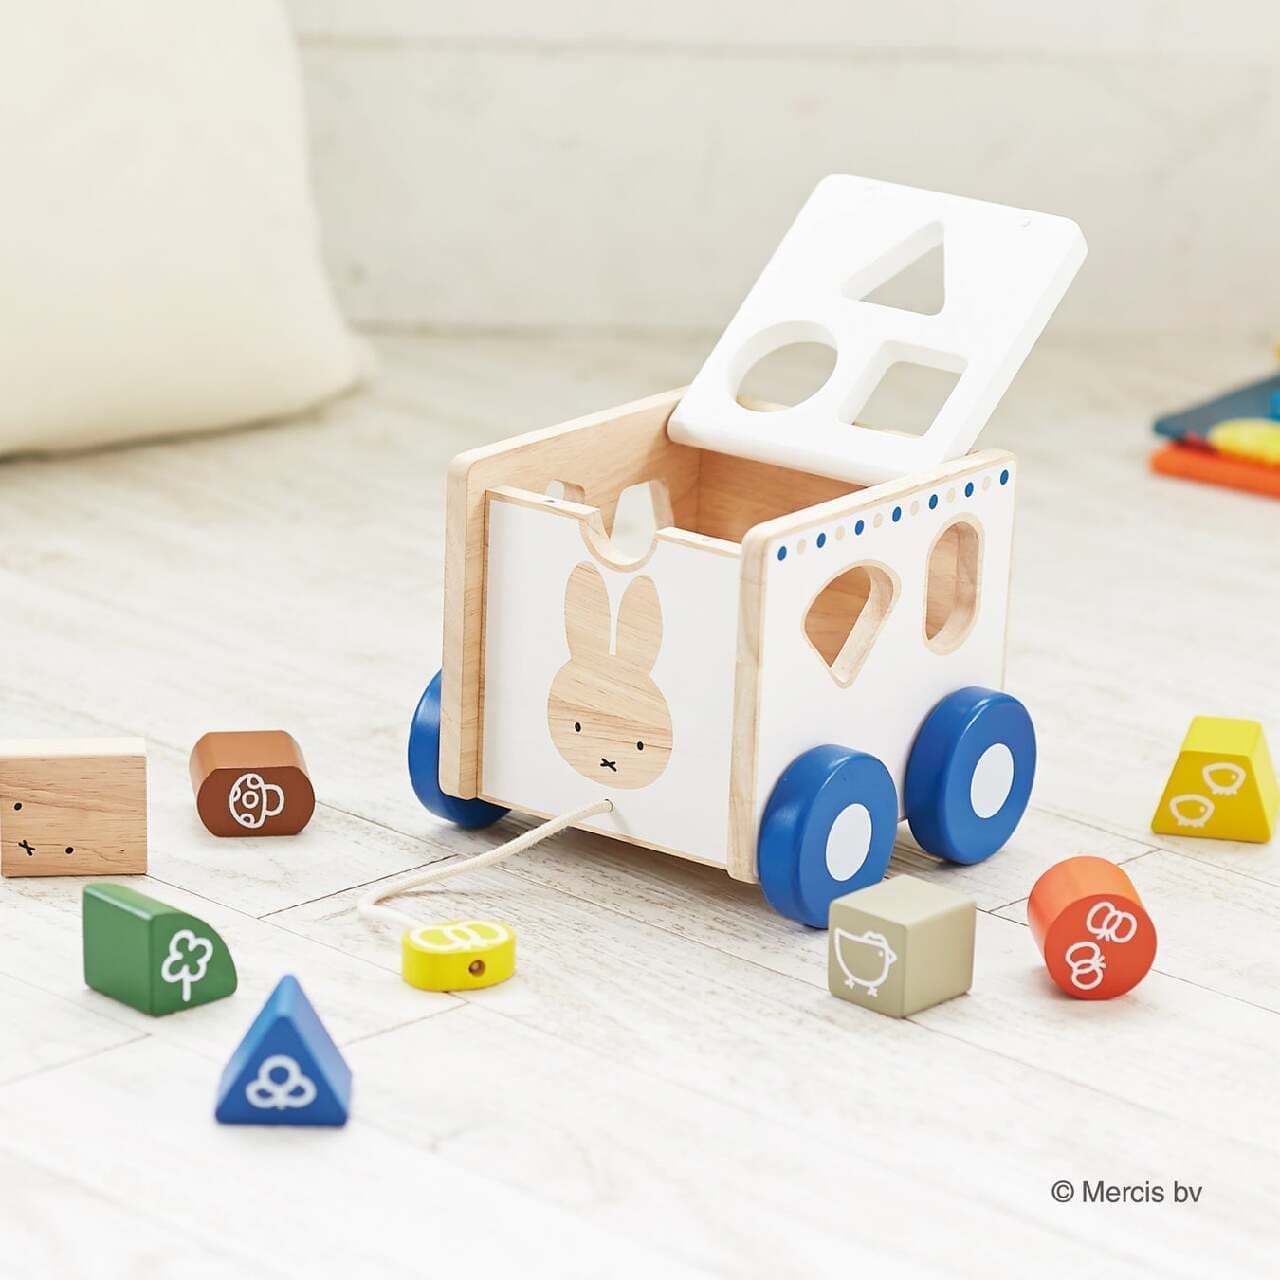 Nichigan to Launch New Wooden Toys to Enjoy the World of Miffy! The toys are made of natural wood and are safe for infants and toddlers.